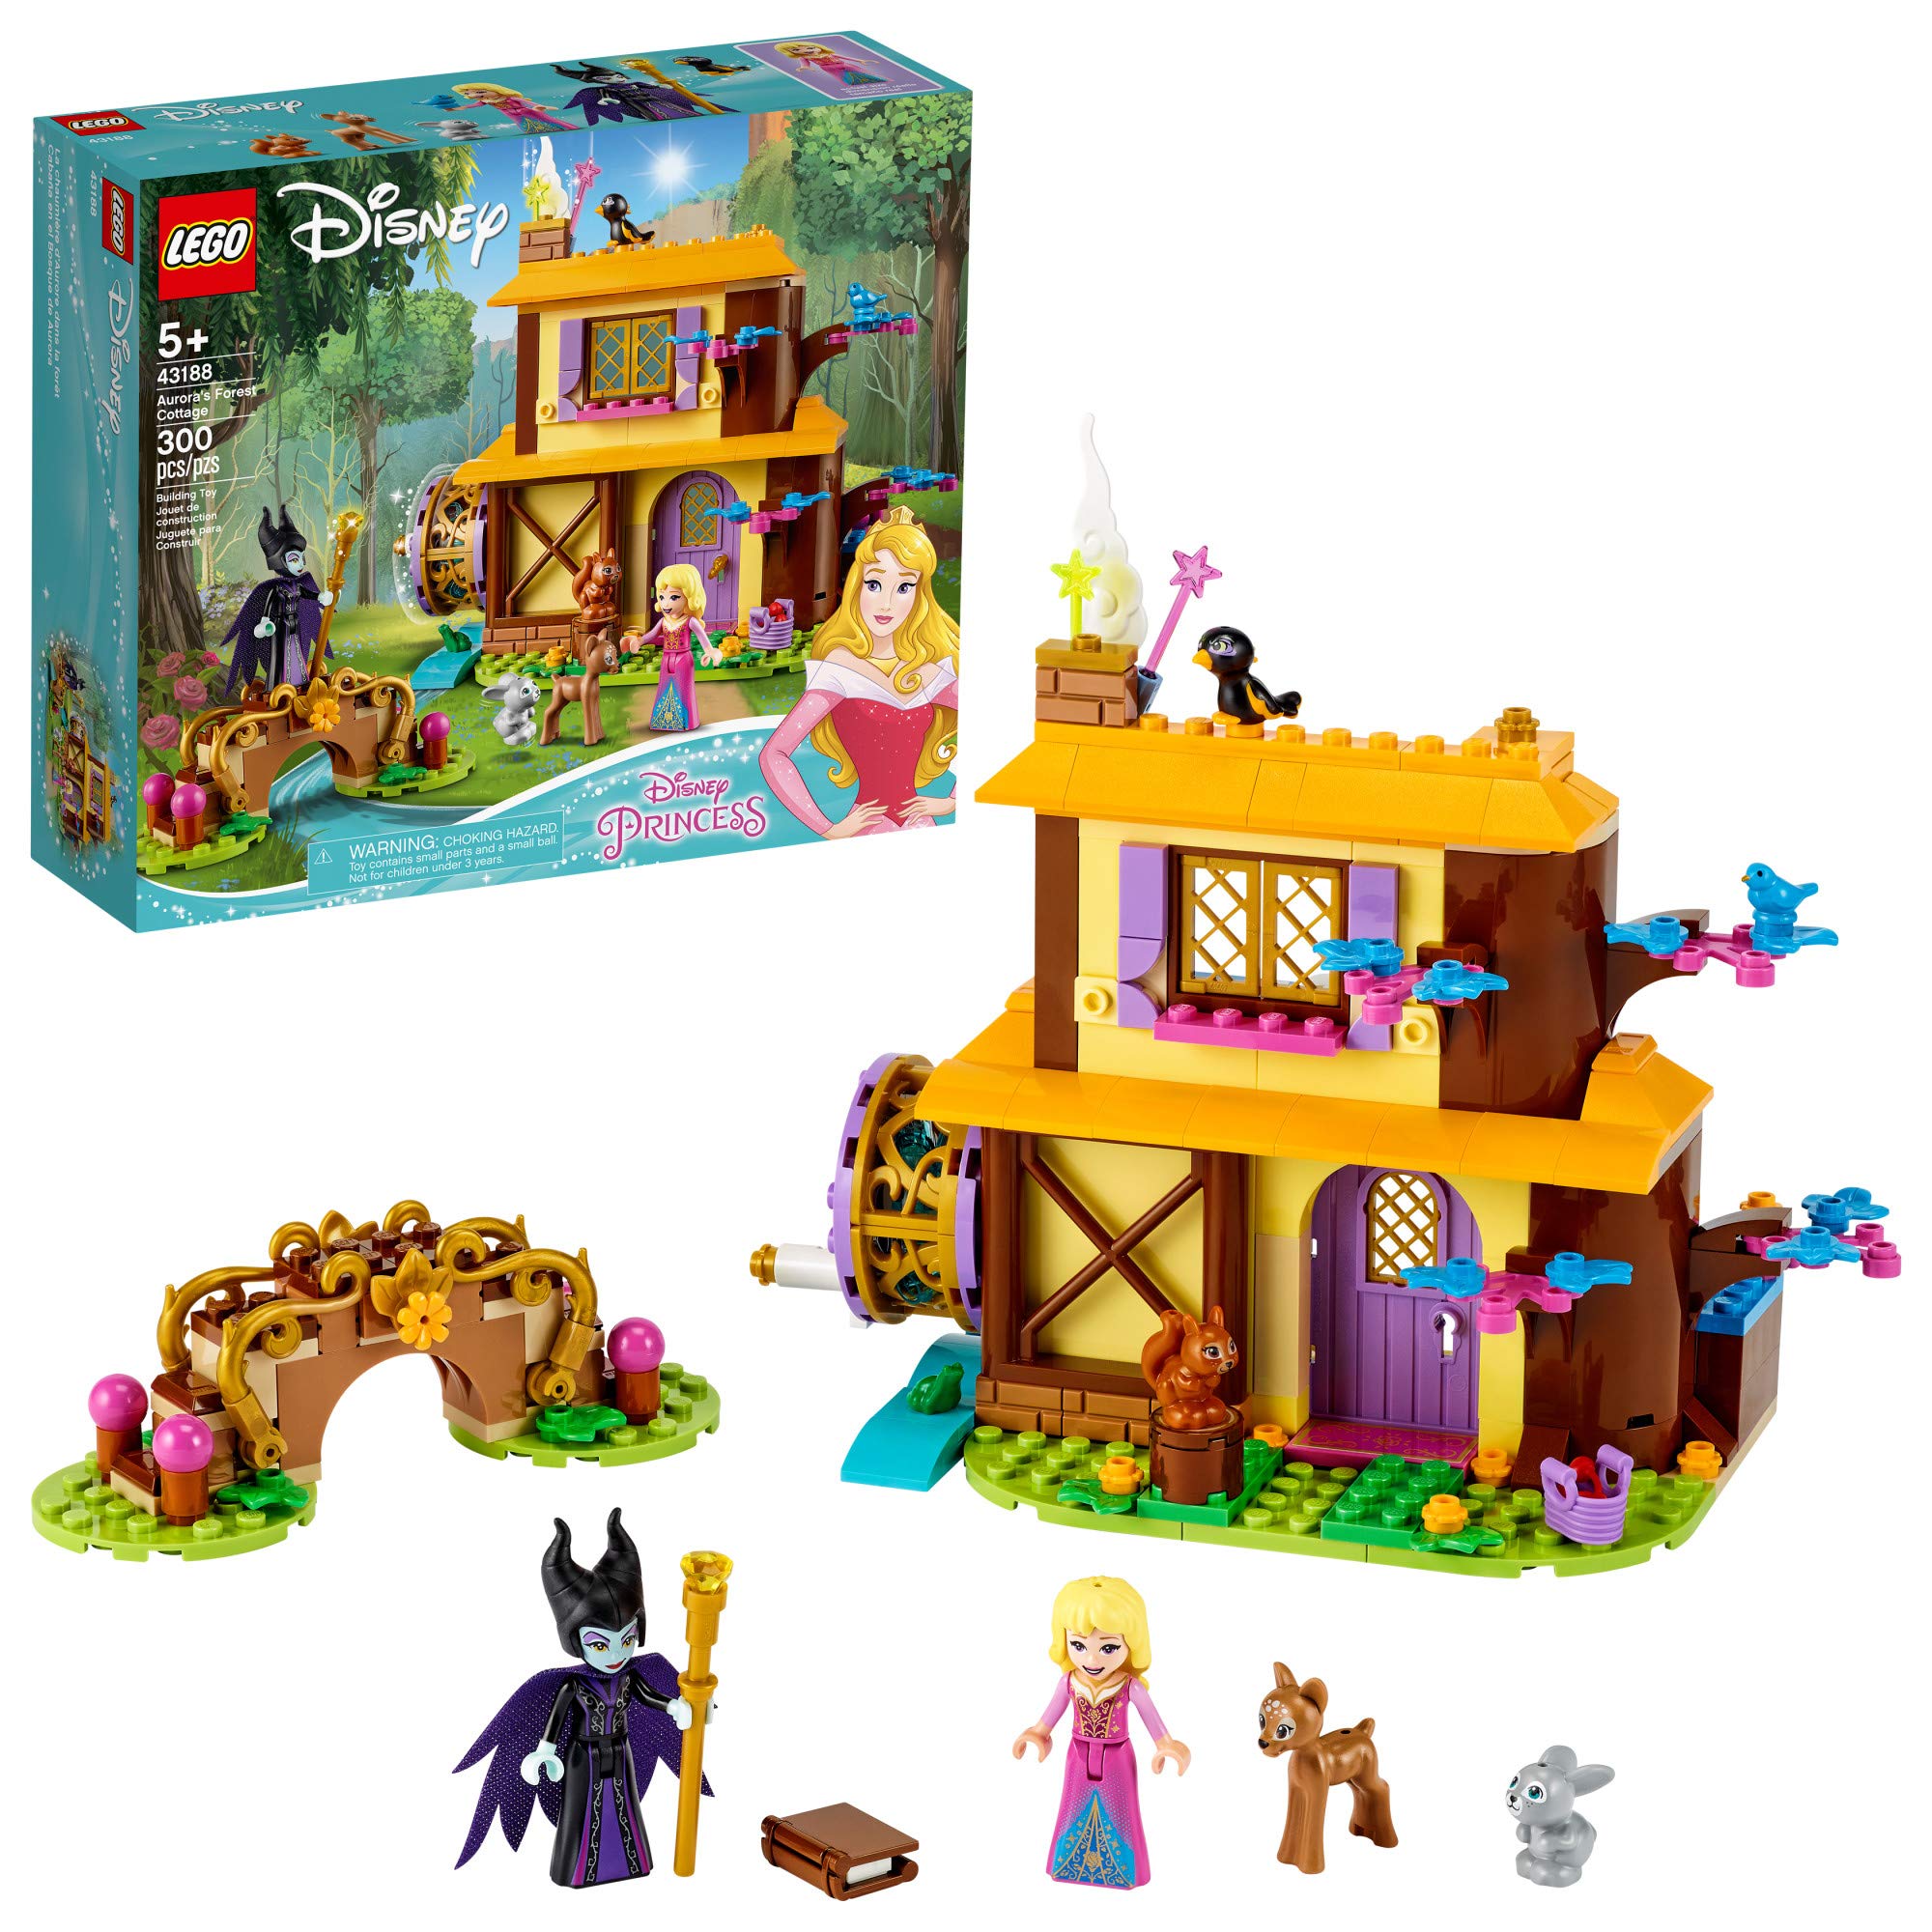 LEGO Disney Aurora’s Forest Cottage 43188, Sleeping Beauty Building Kit for Kids; A Fun Holiday Present or Birthday Gift for Disney Princess Fans (300 Pieces)